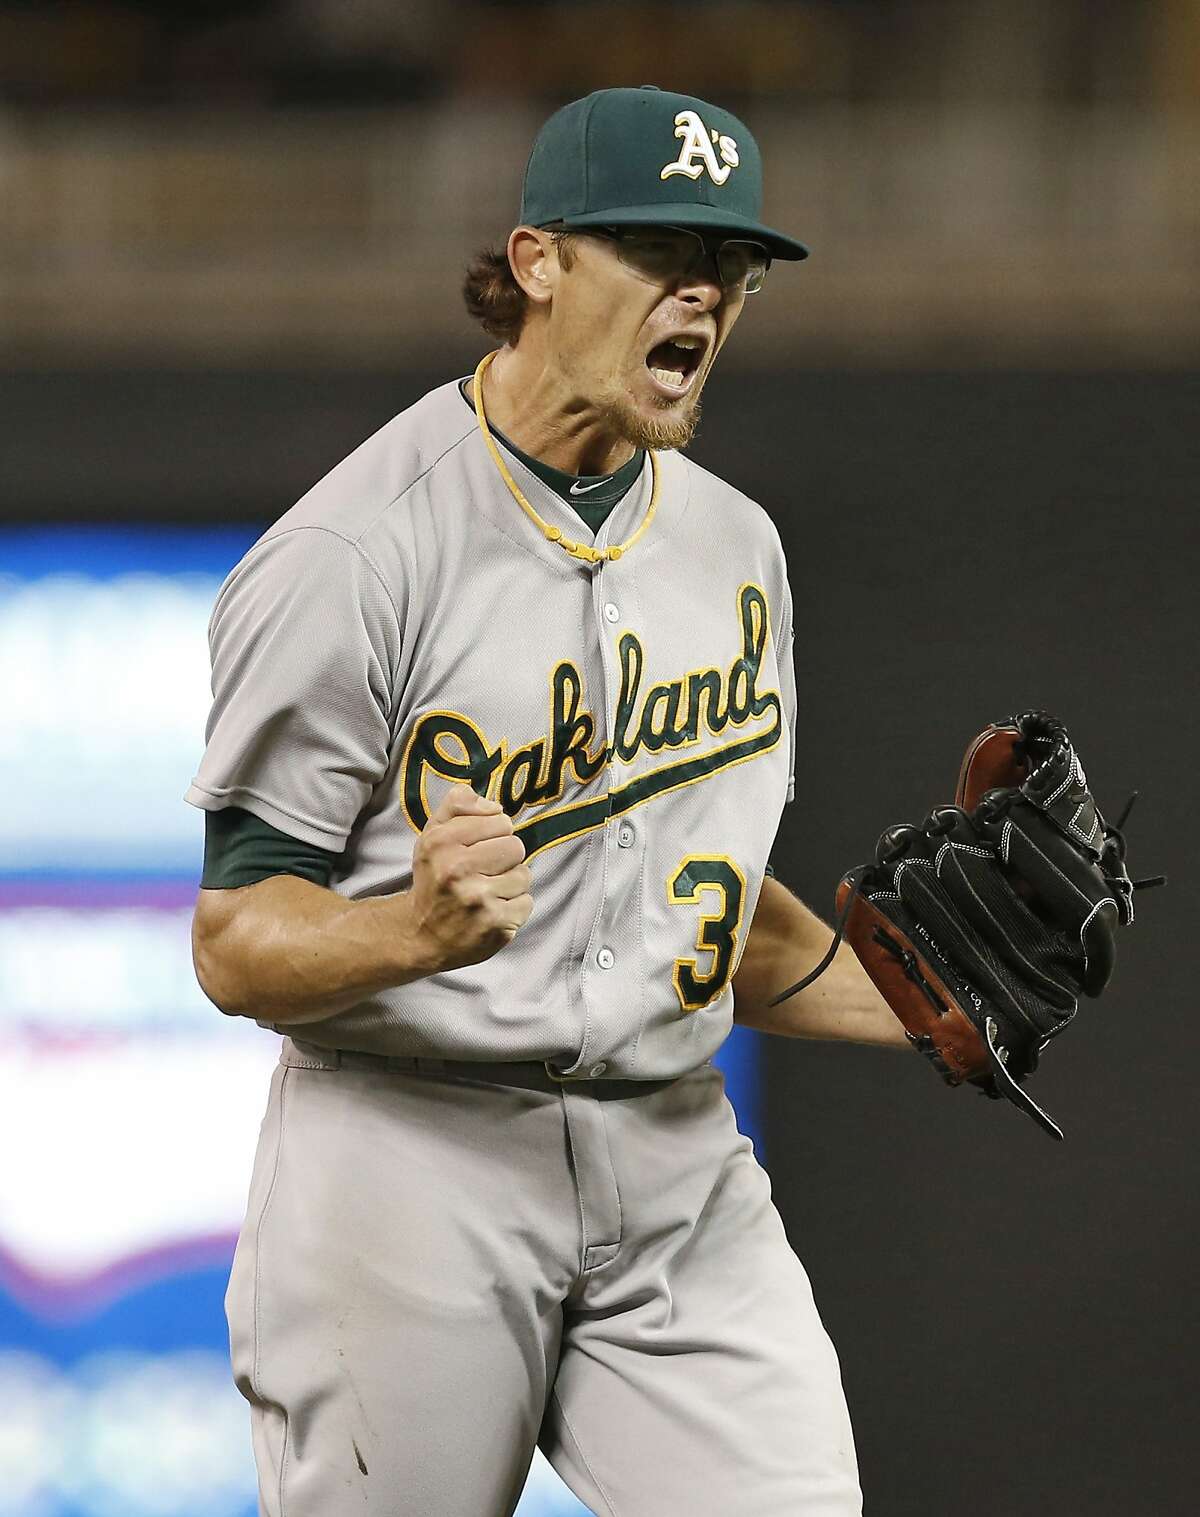 Oakland Athletics relief pitcher Tyler Clippard celebrates after striking out Minnesota Twins' Kennys Vargas to end the baseball game, Tuesday, May 5, 2015, in Minneapolis. The Athletics won 2-1, with Clippard picking up the save. (AP Photo/Jim Mone)